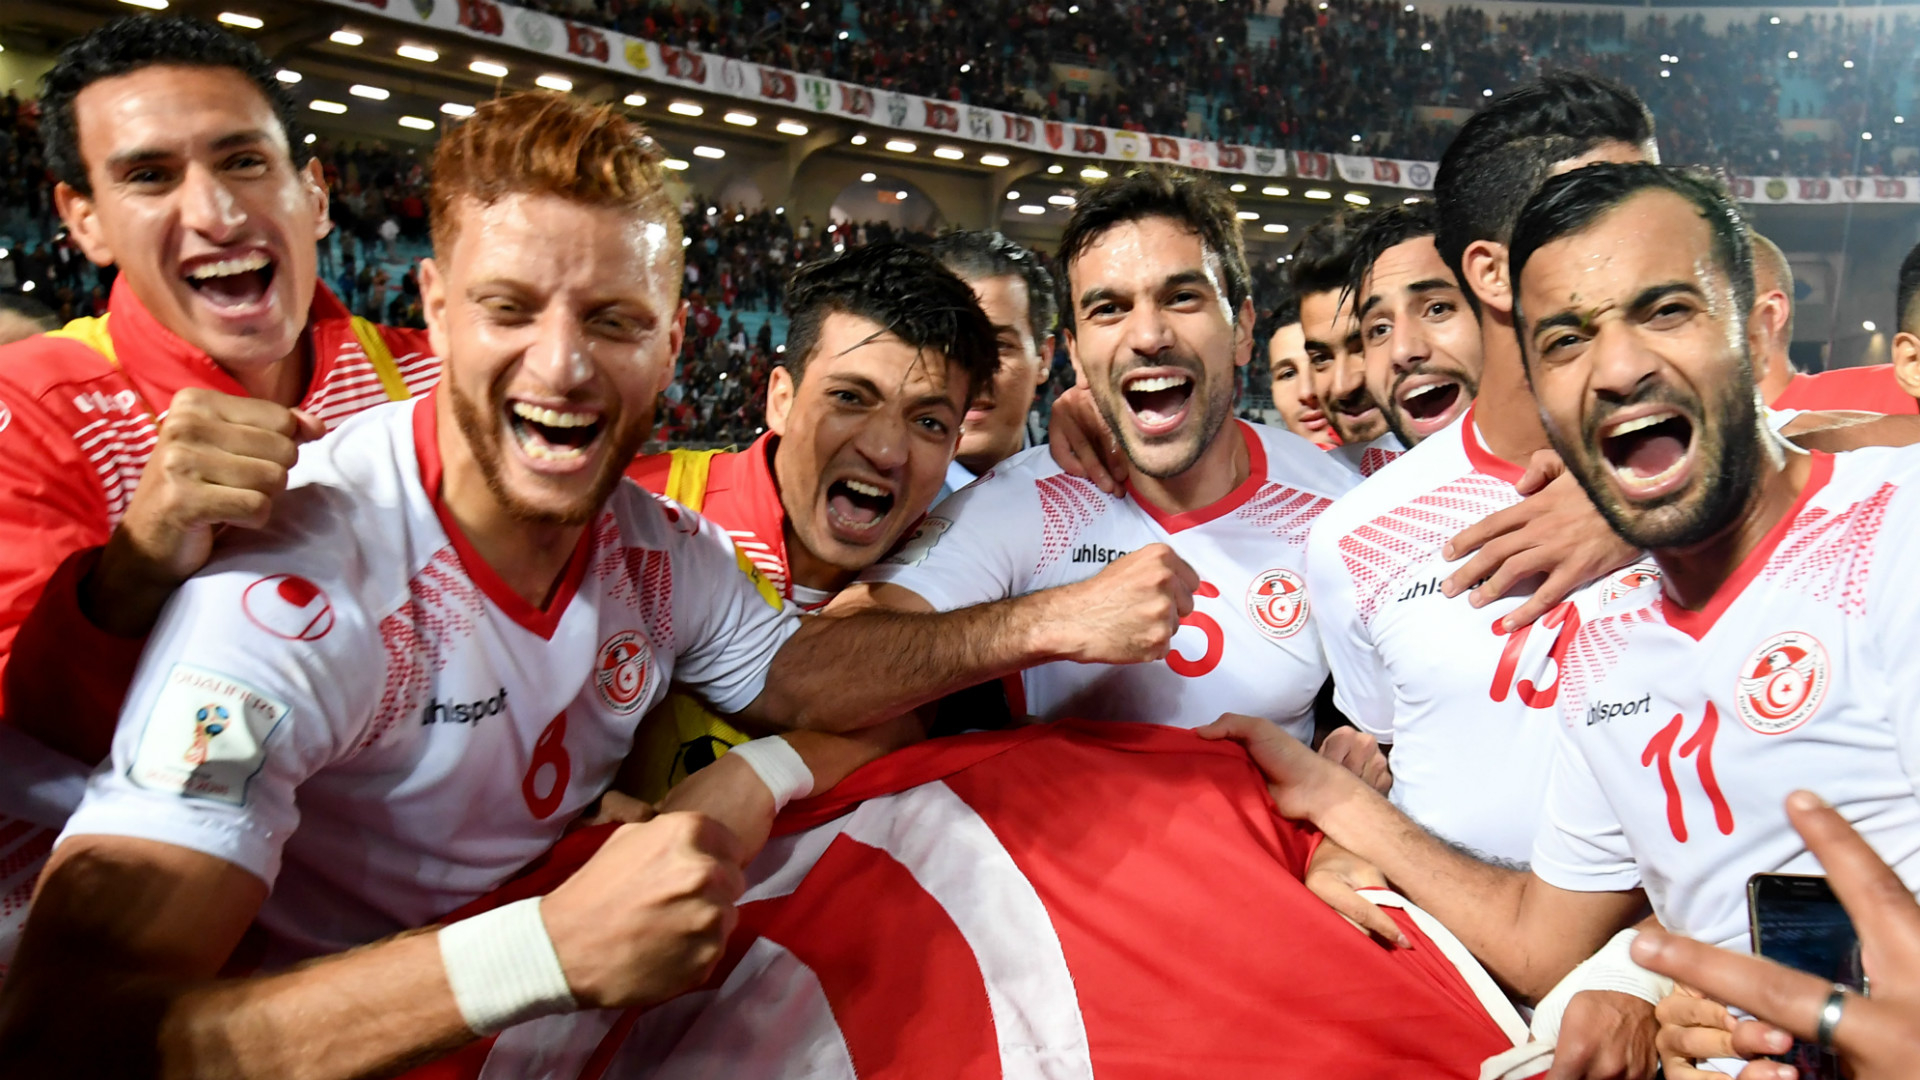 1920x1080 Free download Get to know the preparation matches for World Cup participants [] for your Desktop, Mobile \u0026 Tablet | Explore 15+ Tunisia National Football Team Wallpapers | Tunisia National Football Team